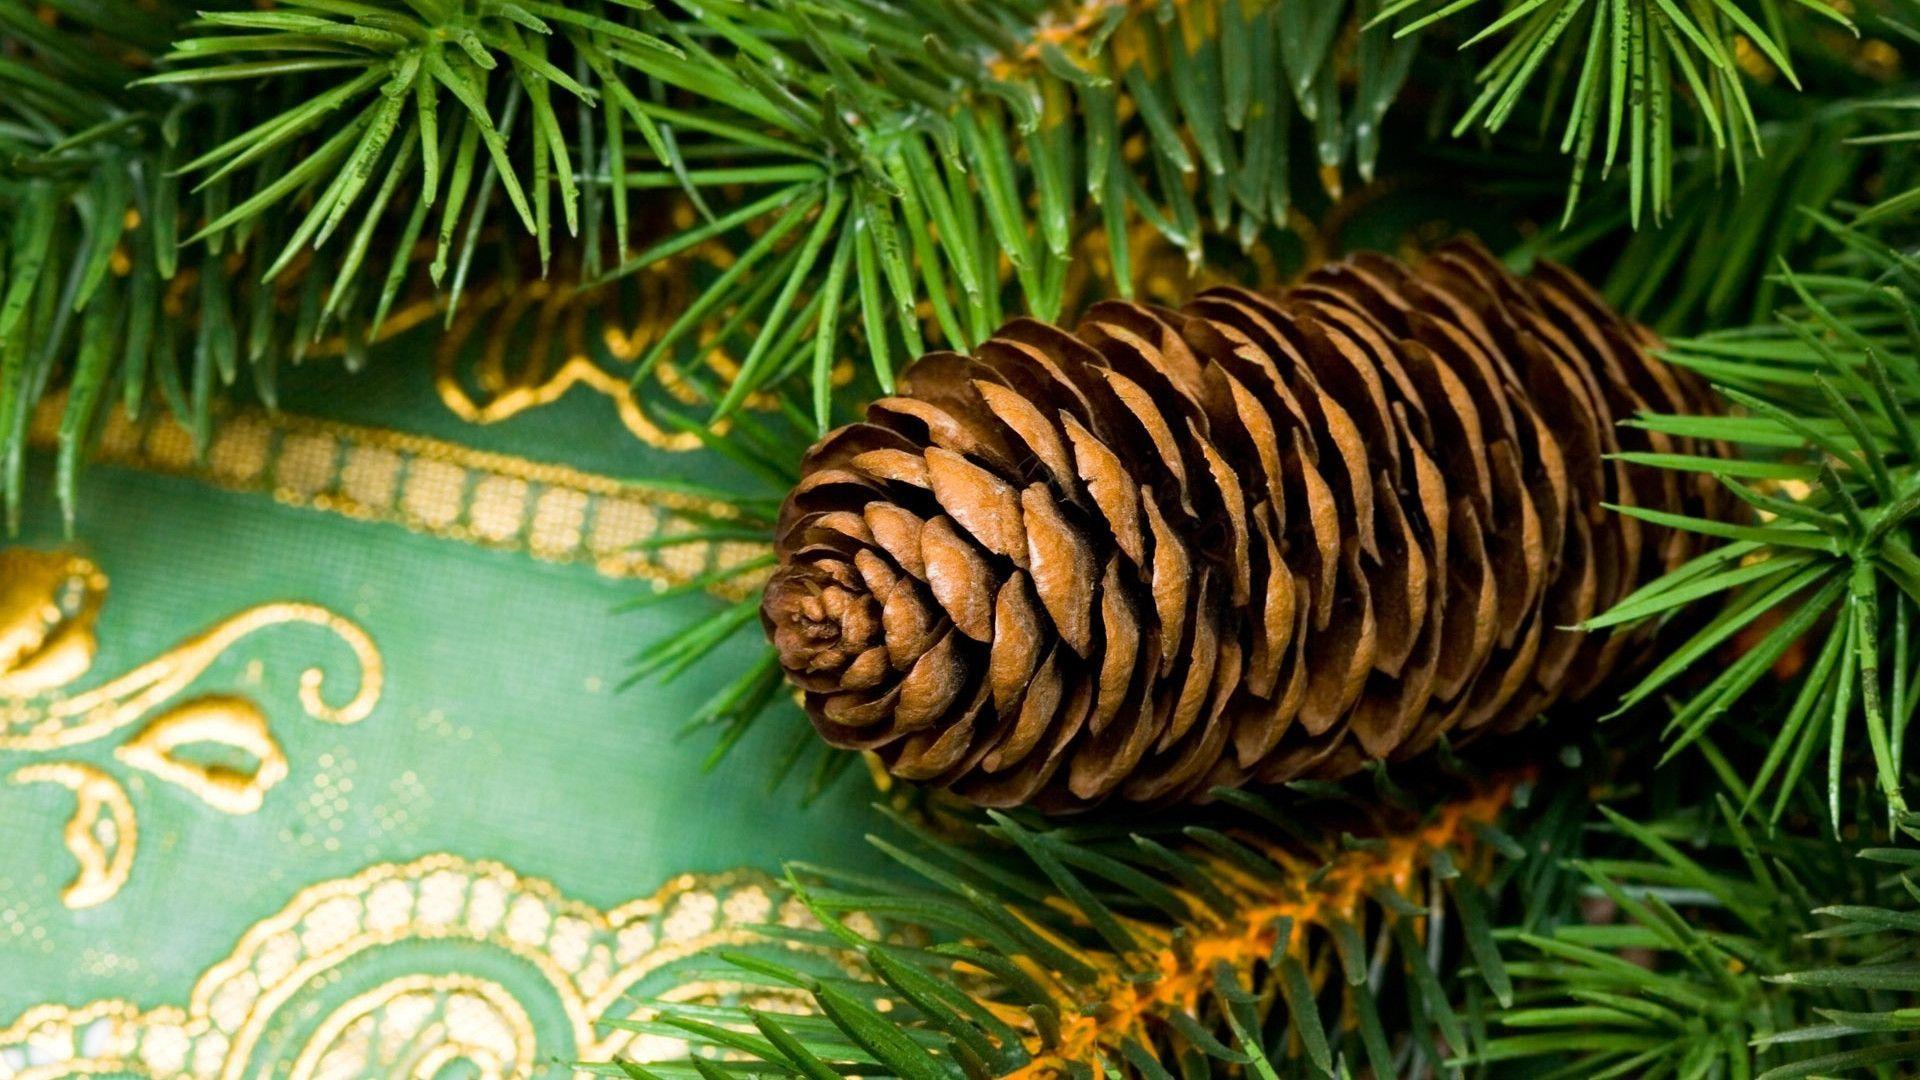 Pine Cone Wallpapers